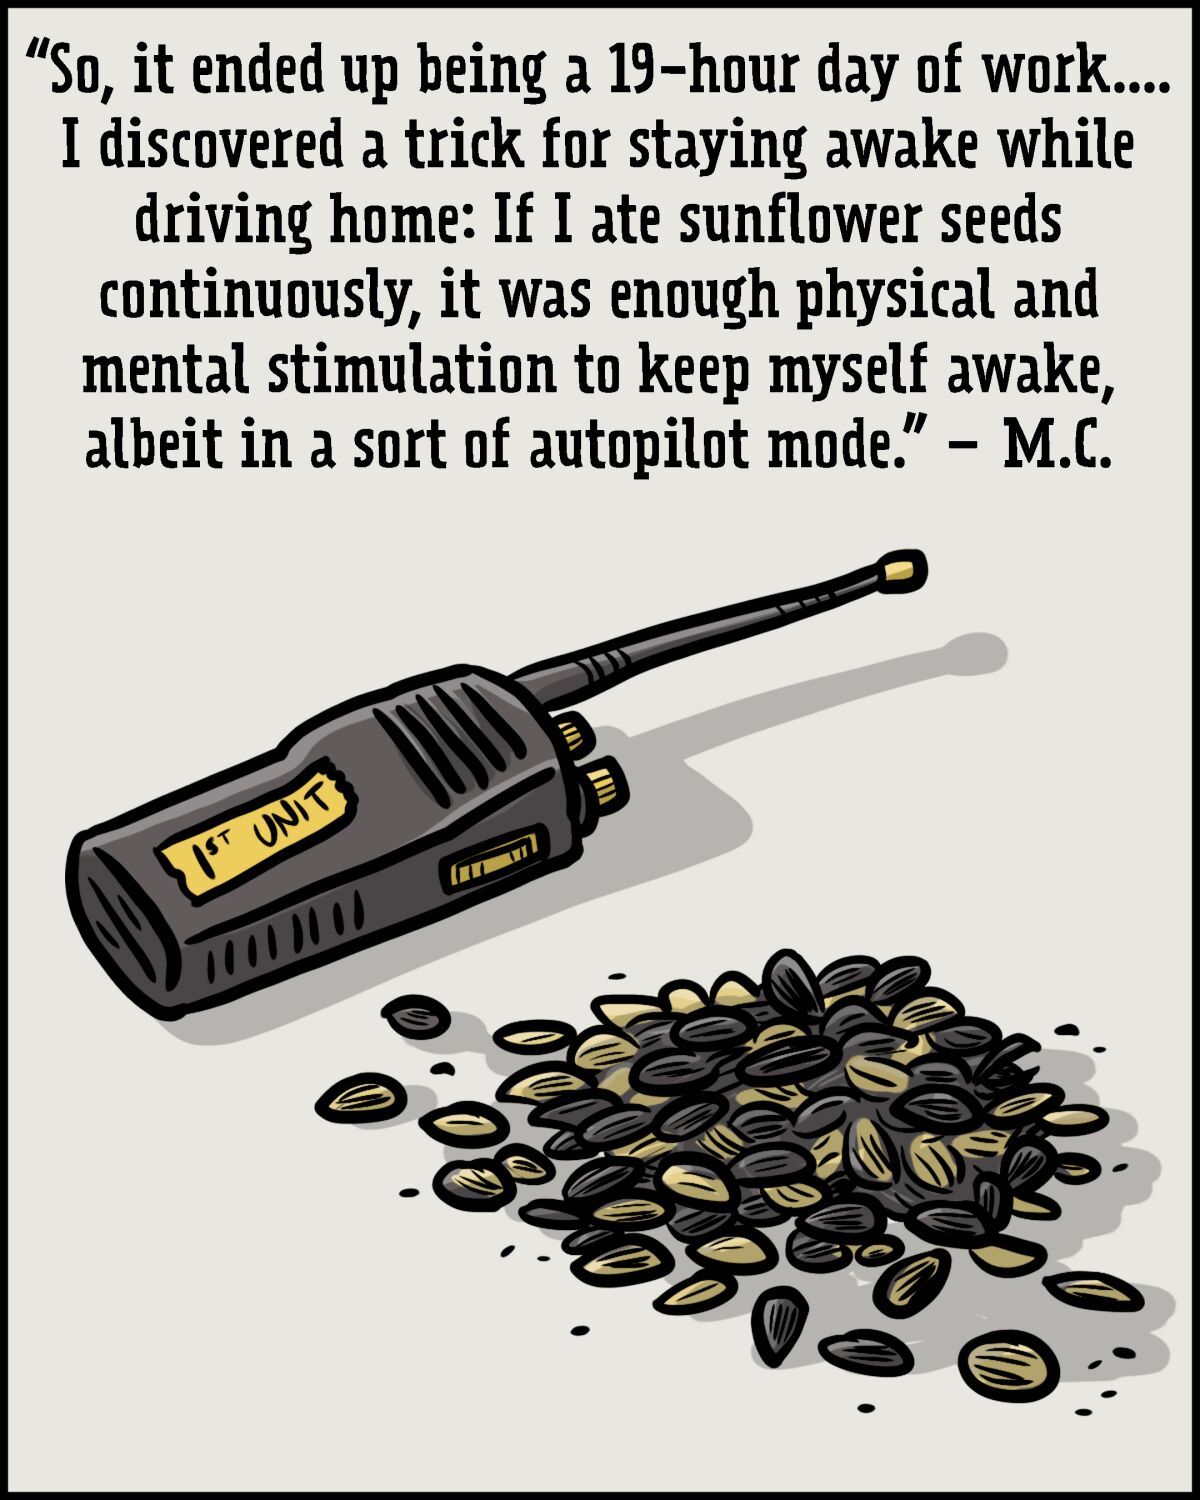 An illustration of a walkie-talkie that says "1st Unit" on it; a pile of sunflower seeds is nearby. 